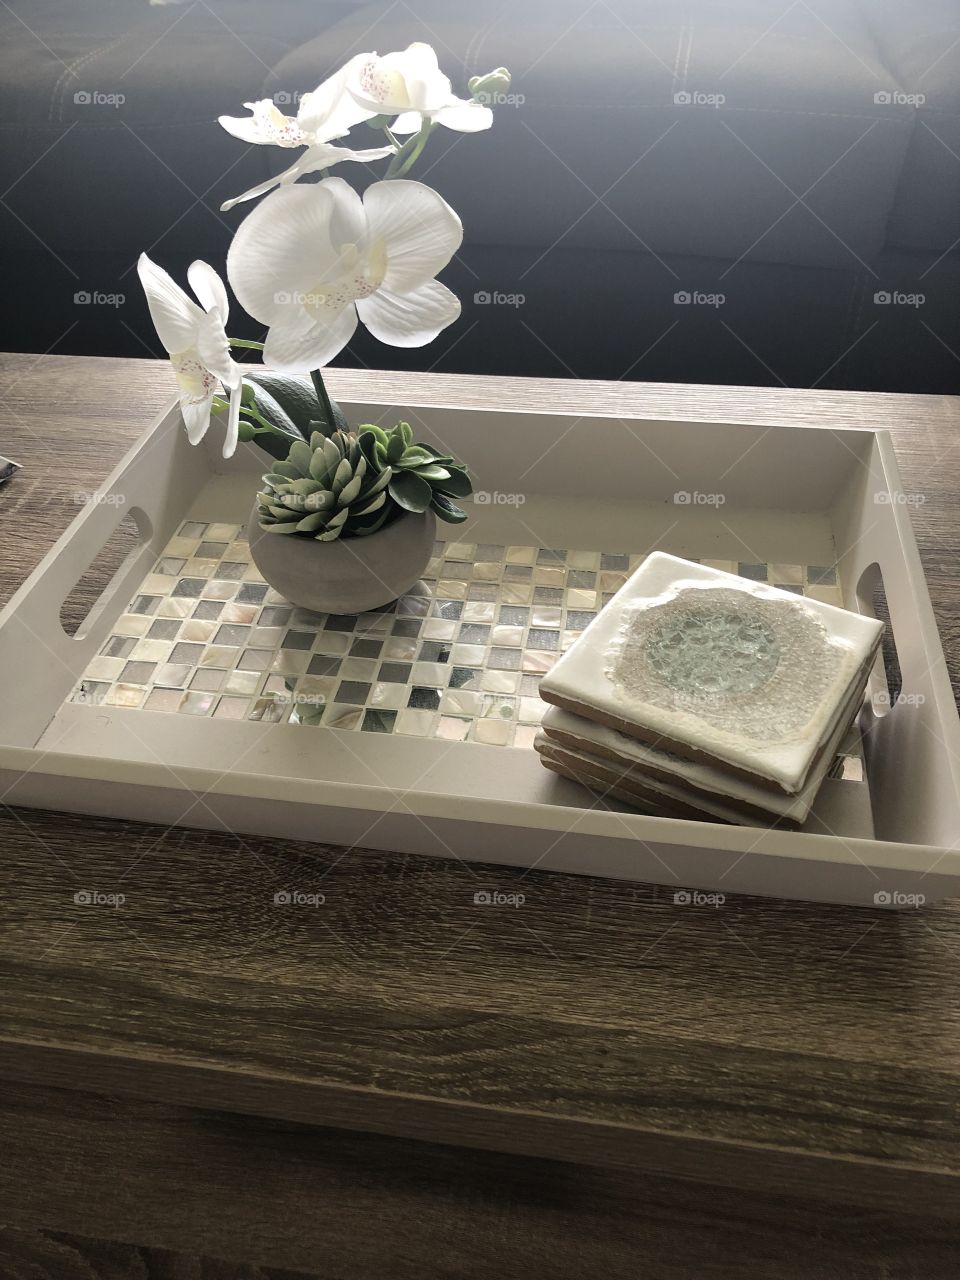 Nice accent tray on a coffee table